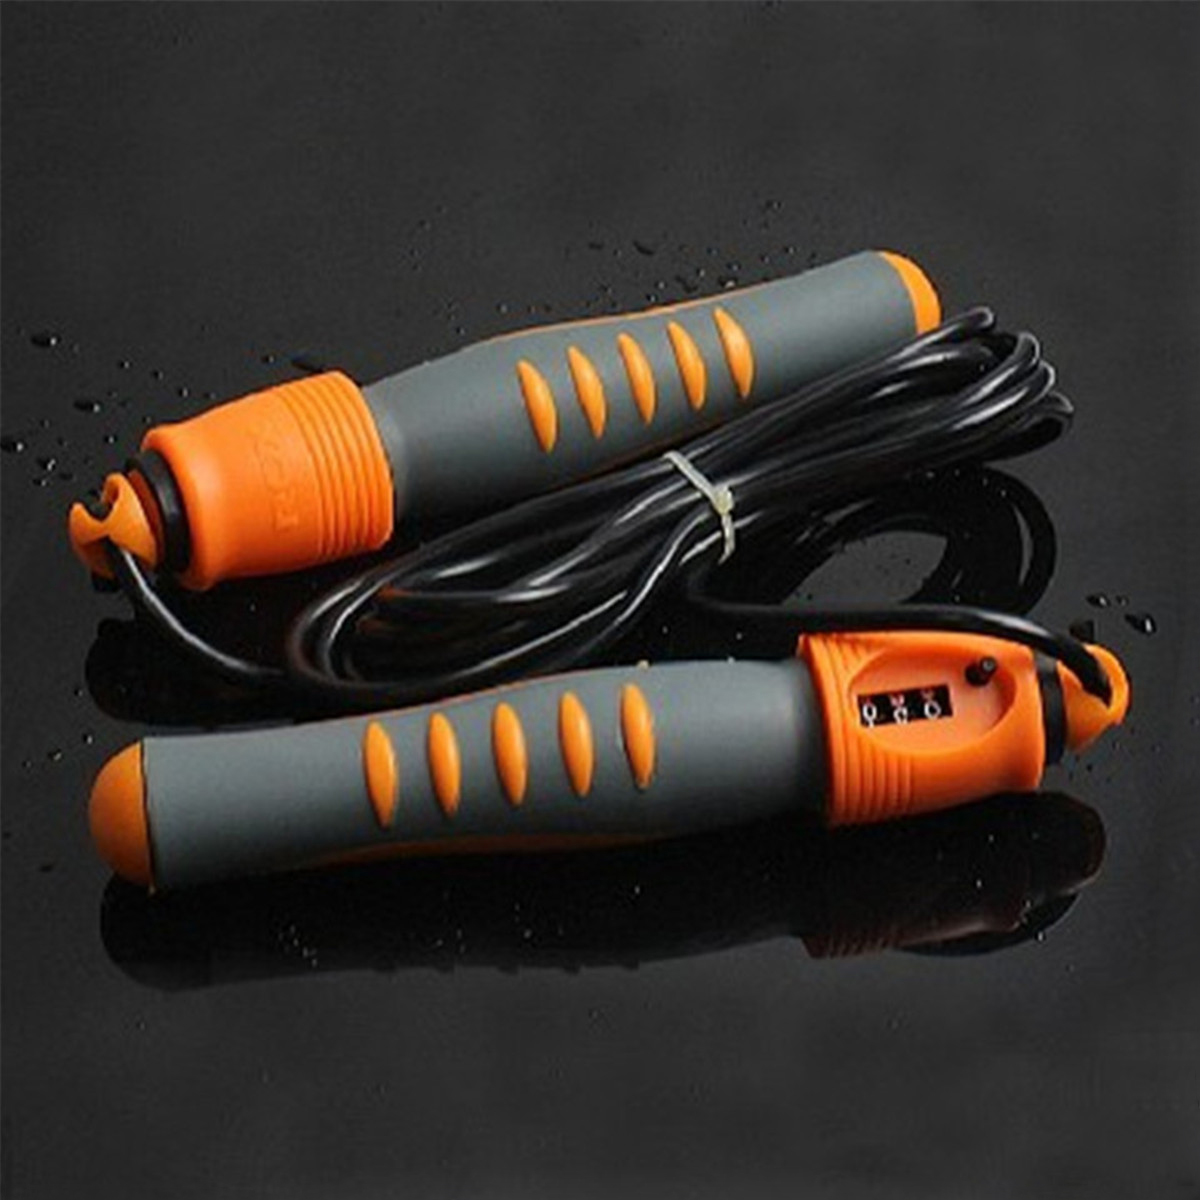 28M-12P-Rubber-Handle-Professional-Jumping-Rope-w-Counter-Home-Fast-Speed-Sport-Adjustable-Cardio-Ex-1660418-8